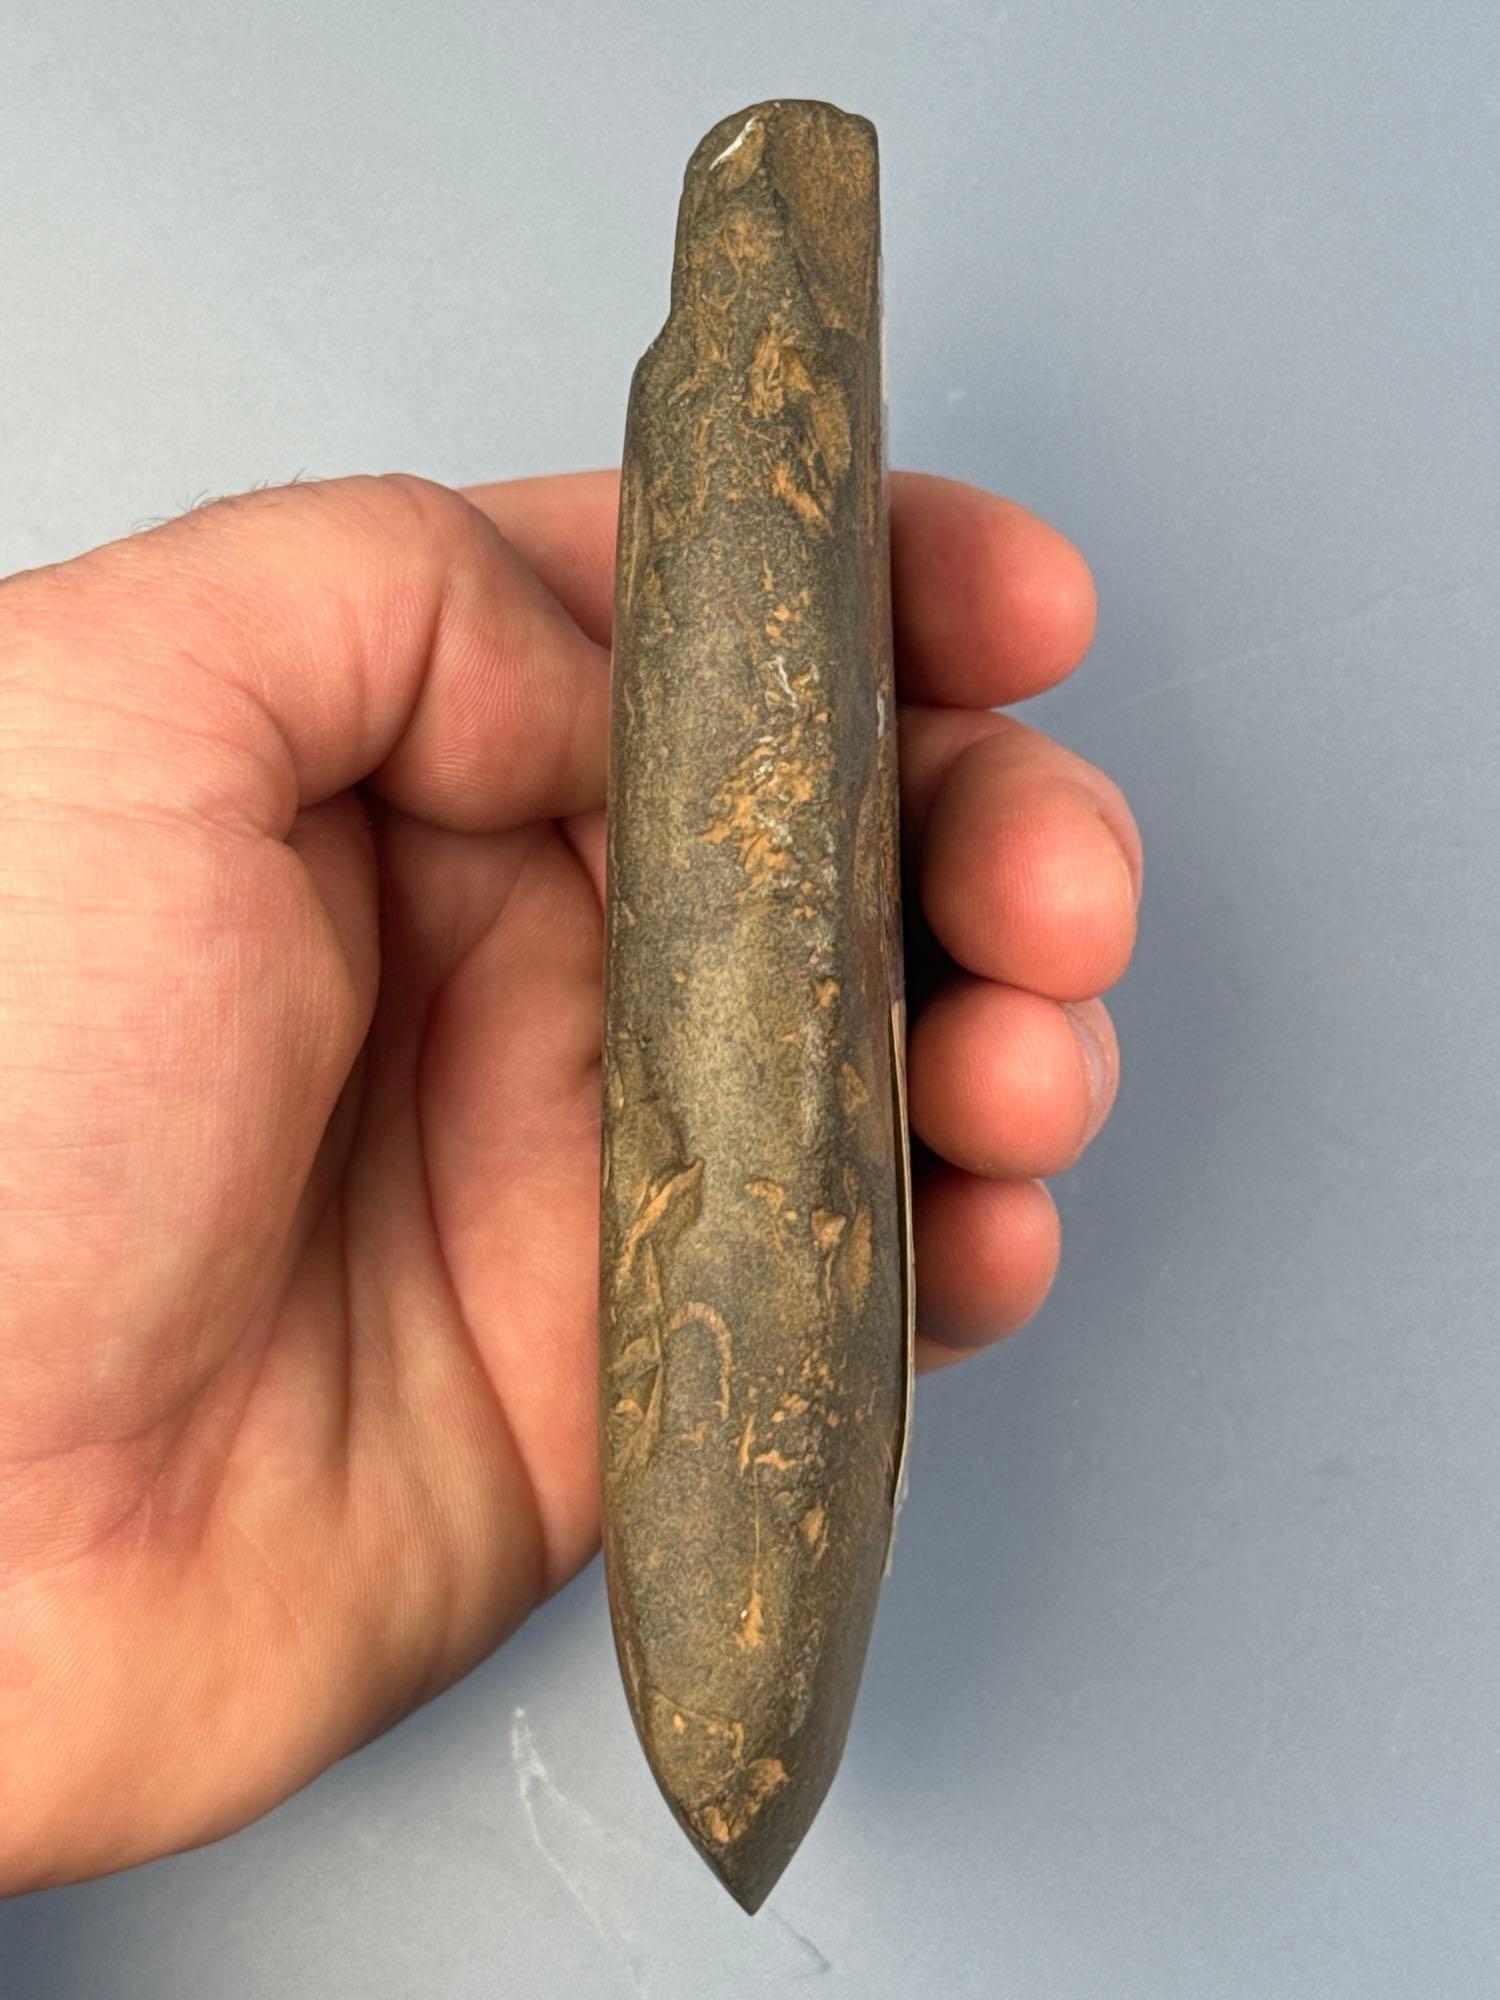 5 3/8" Polished Bit Celt, Found in Warren Co., New Jersey, Ex: Gingles Collection